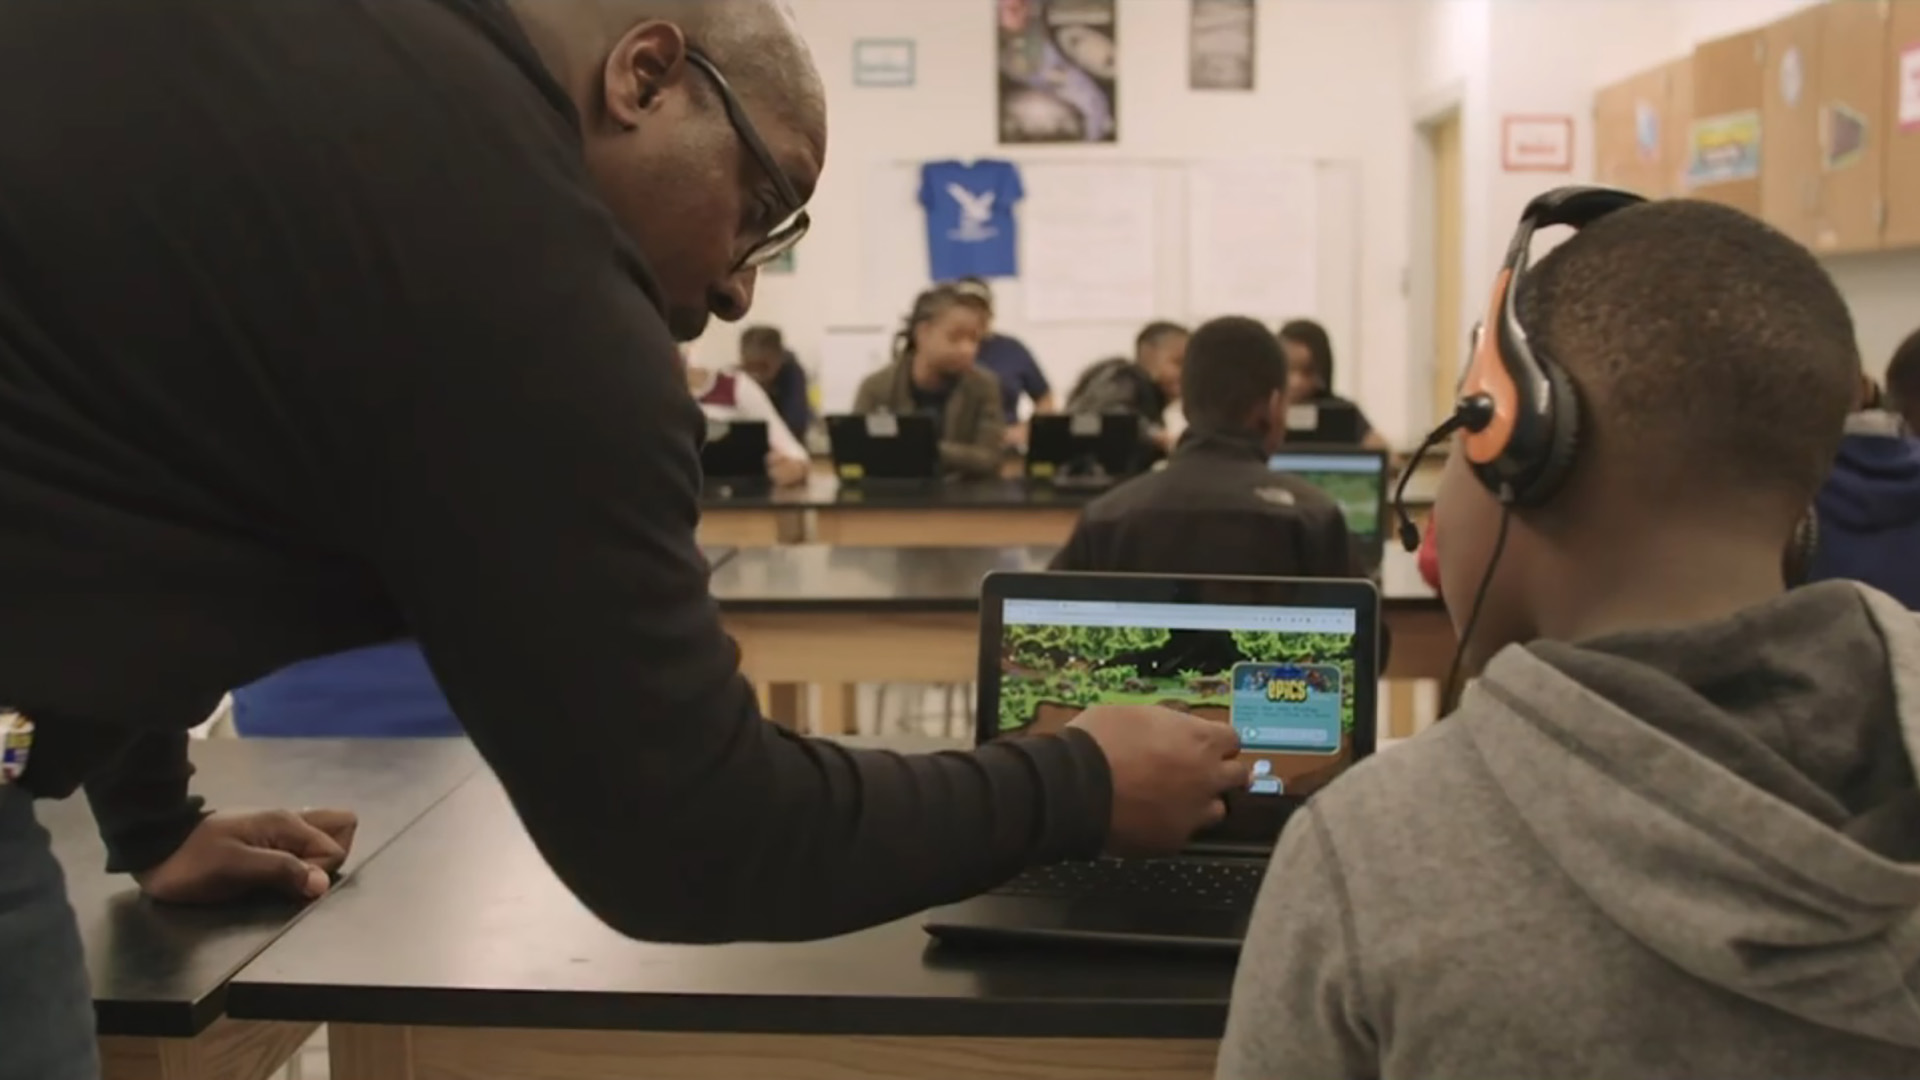 VR technology in use in classrooms